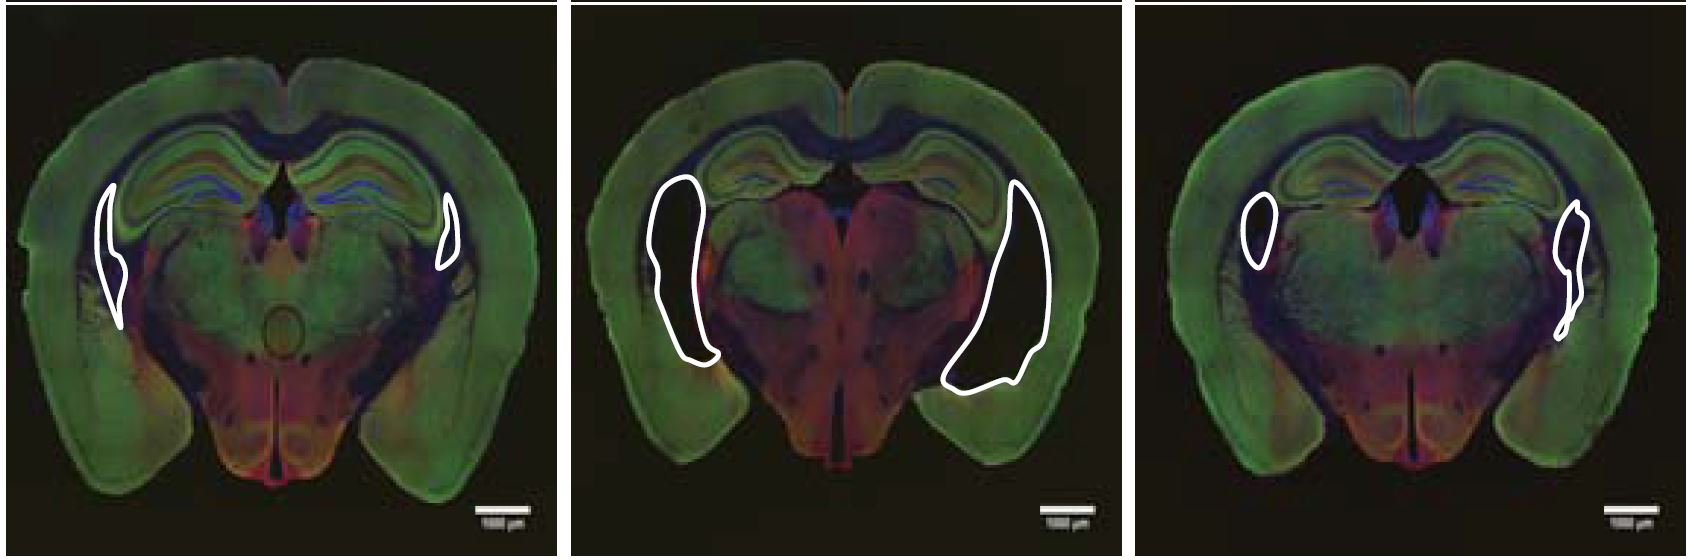 Three mouse brains in a row. White outlines show ventricles, or dark open spaces within